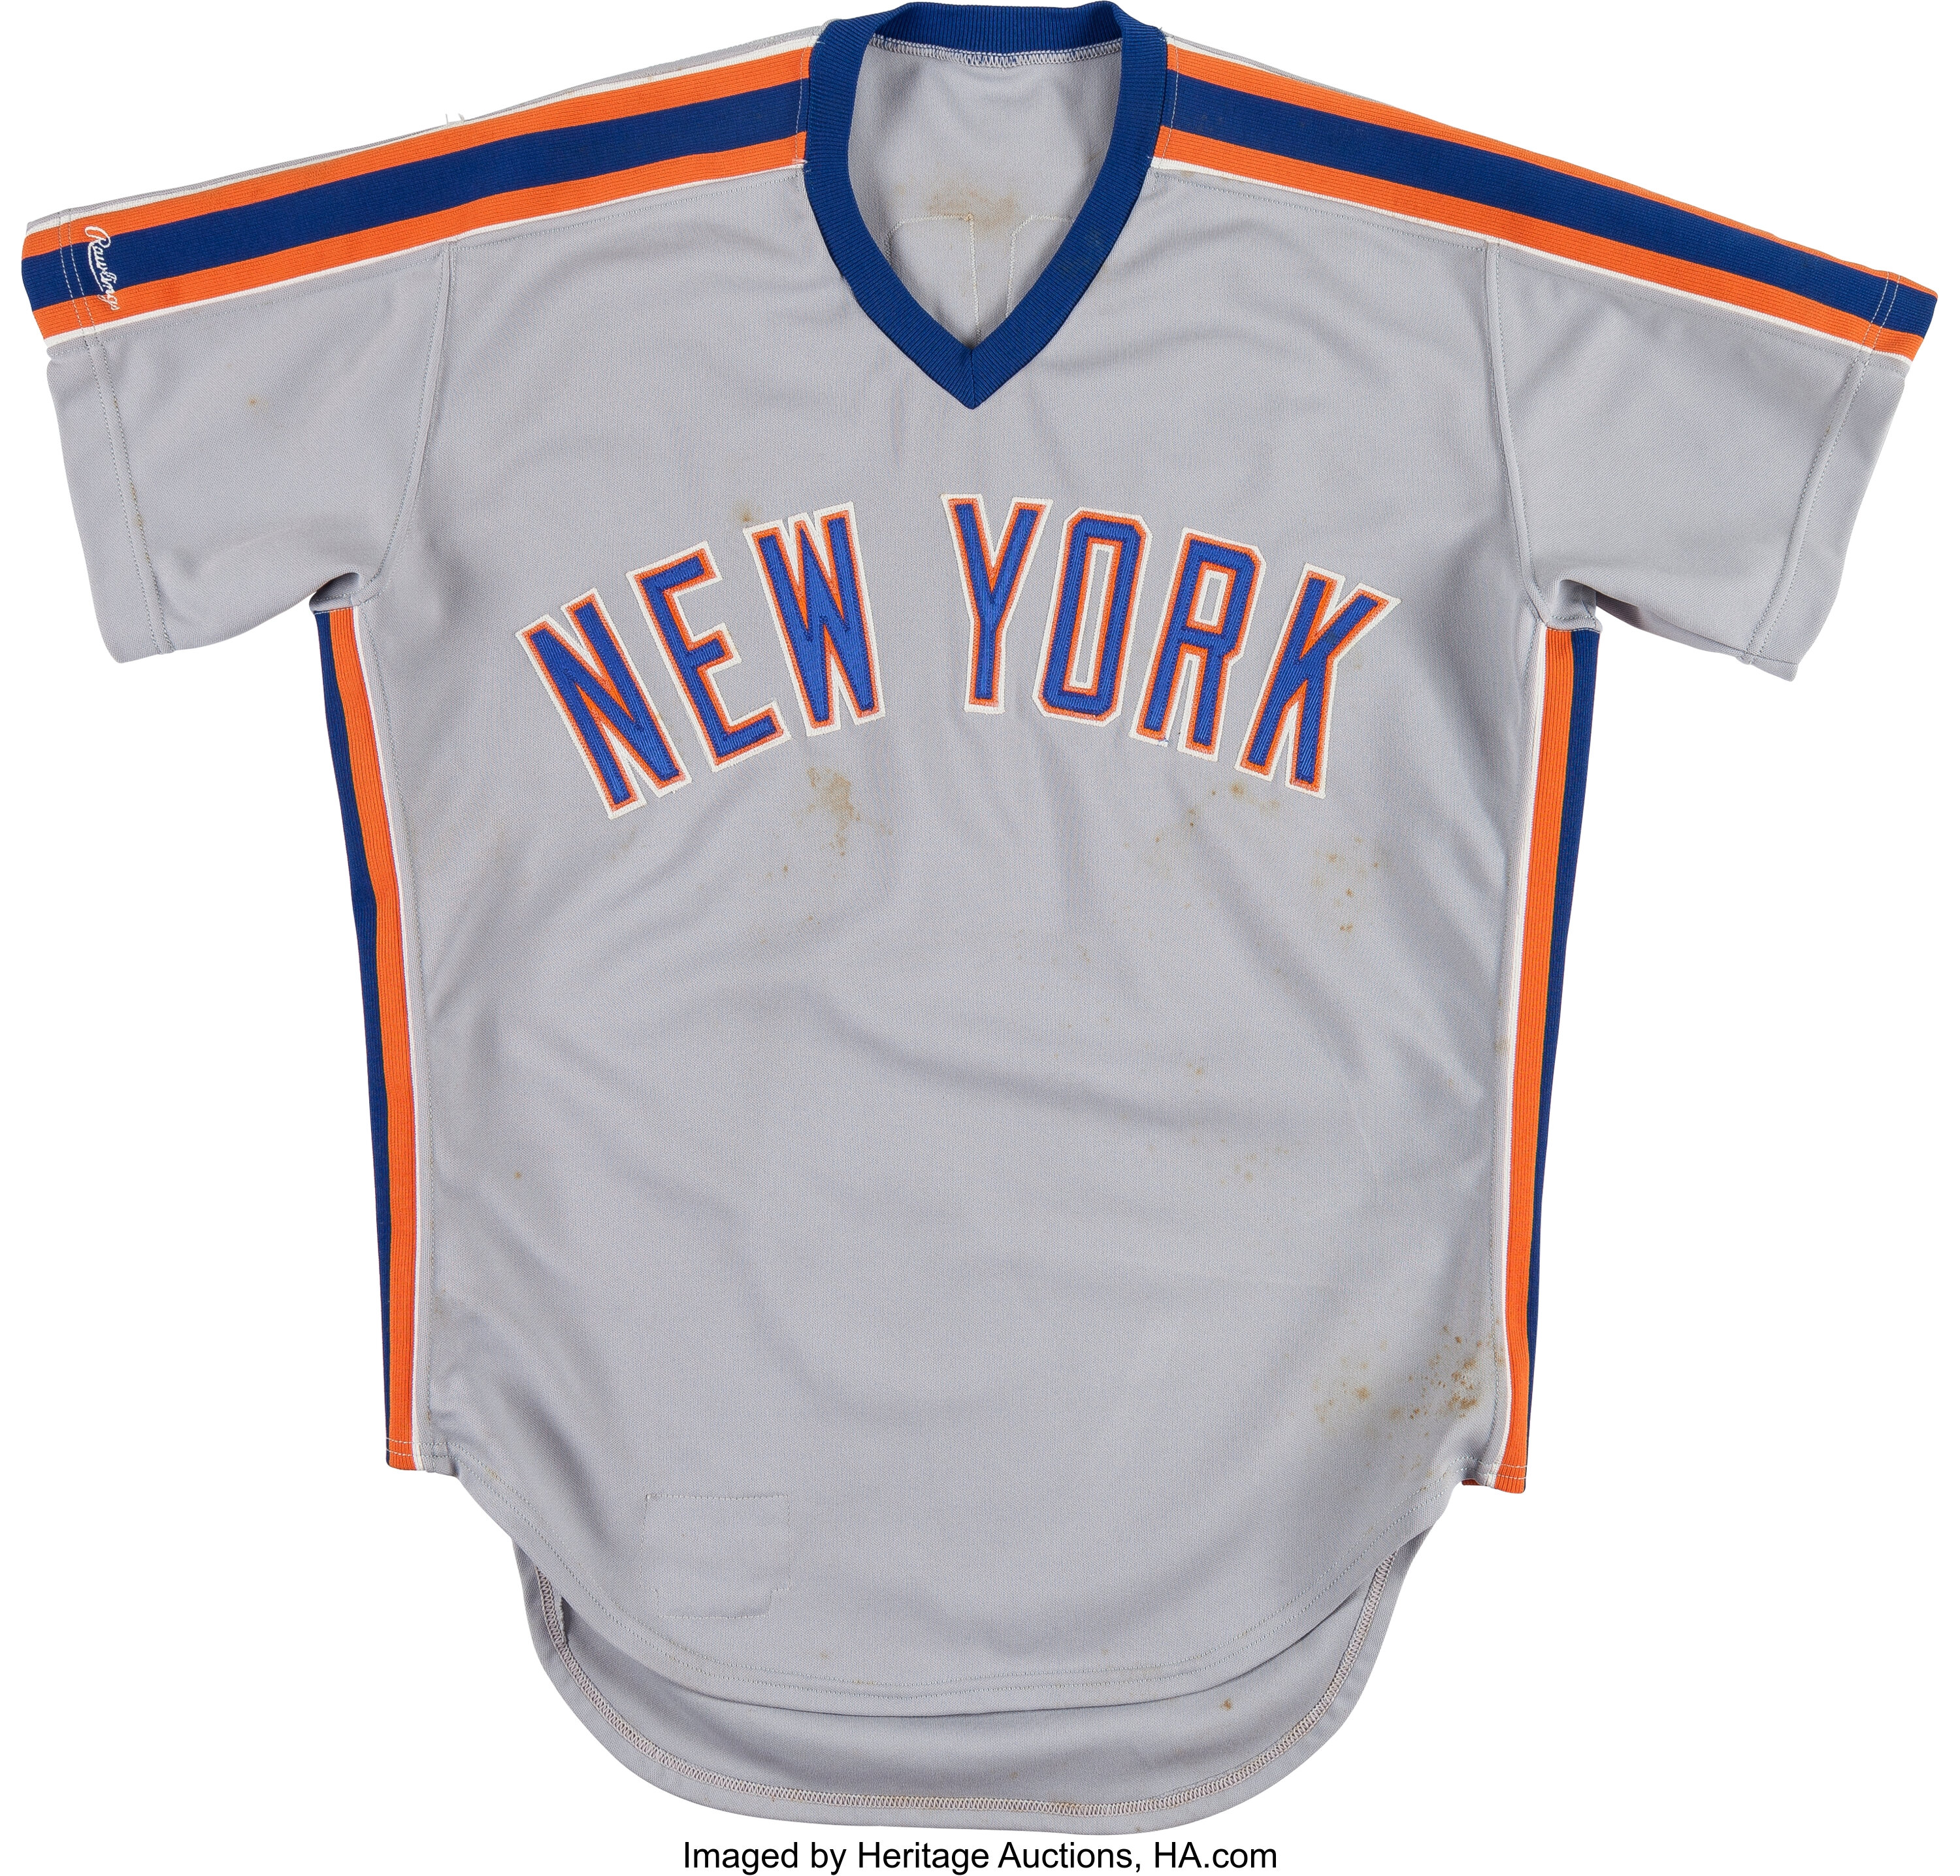 EXCLUSIVE: Mets sold off many game-worn jerseys from first game